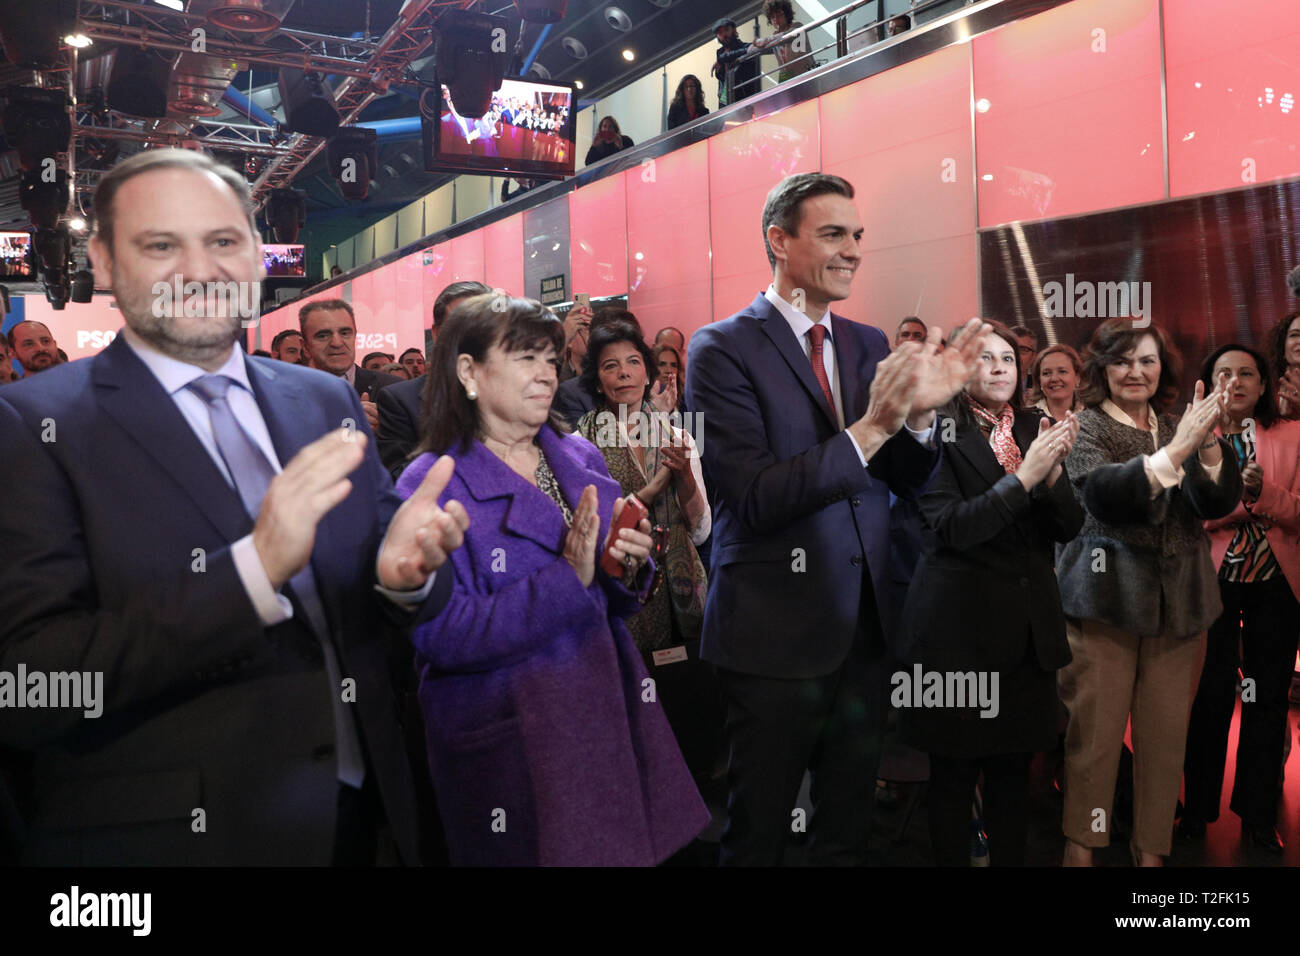 Madrid, Spain. 02nd Apr, 2019. The President of the Government and Secretary General of the PSOE, Pedro Sanchez, presents the electoral campaign of the Socialists. Credit: Jesús Hellin/Alamy Live News Stock Photo